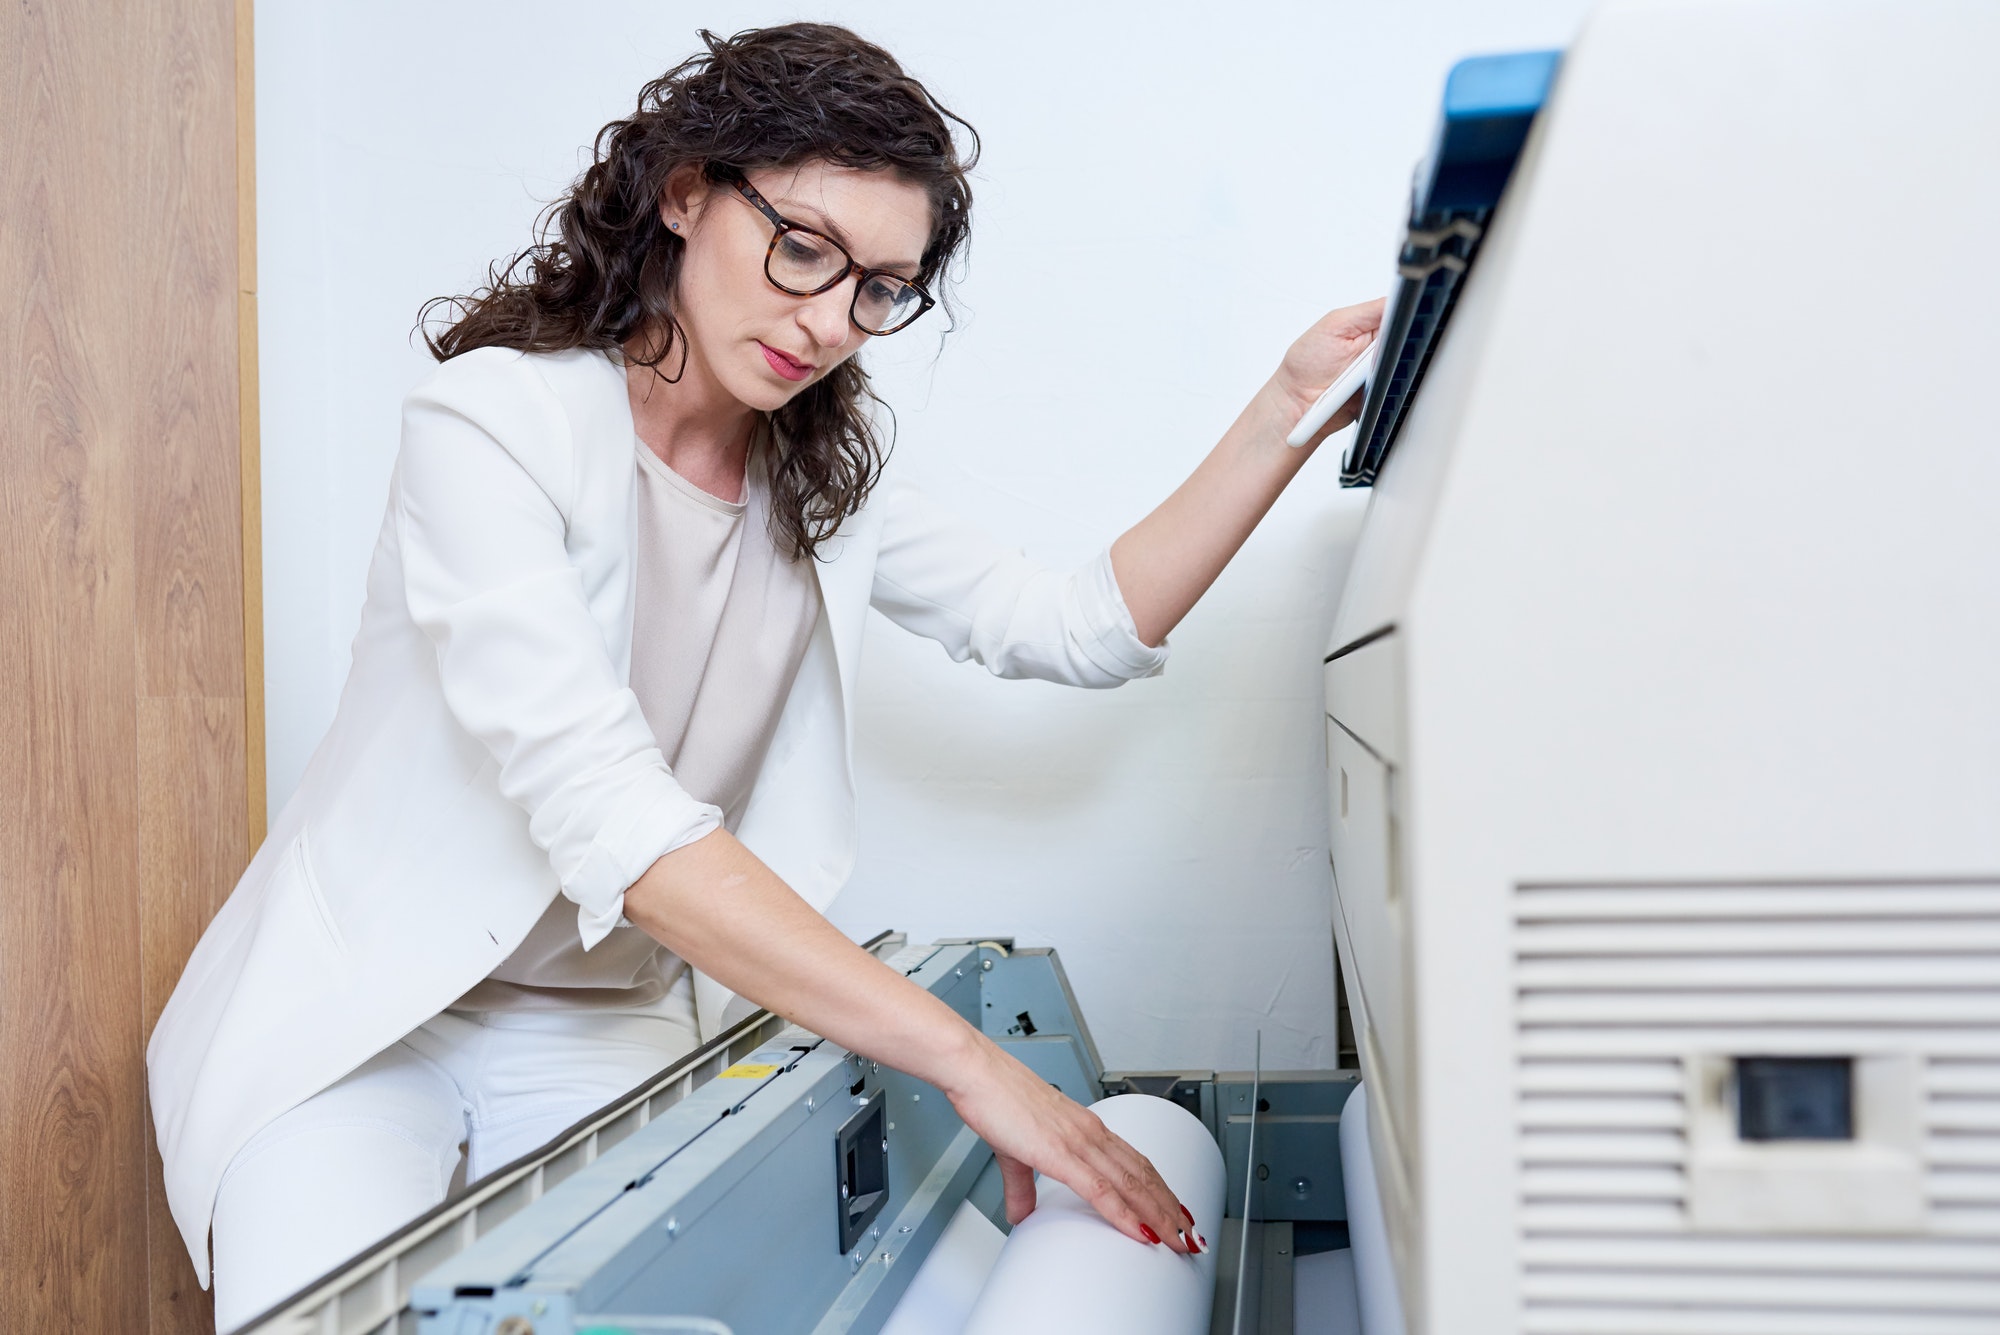 Woman putting paper into printer